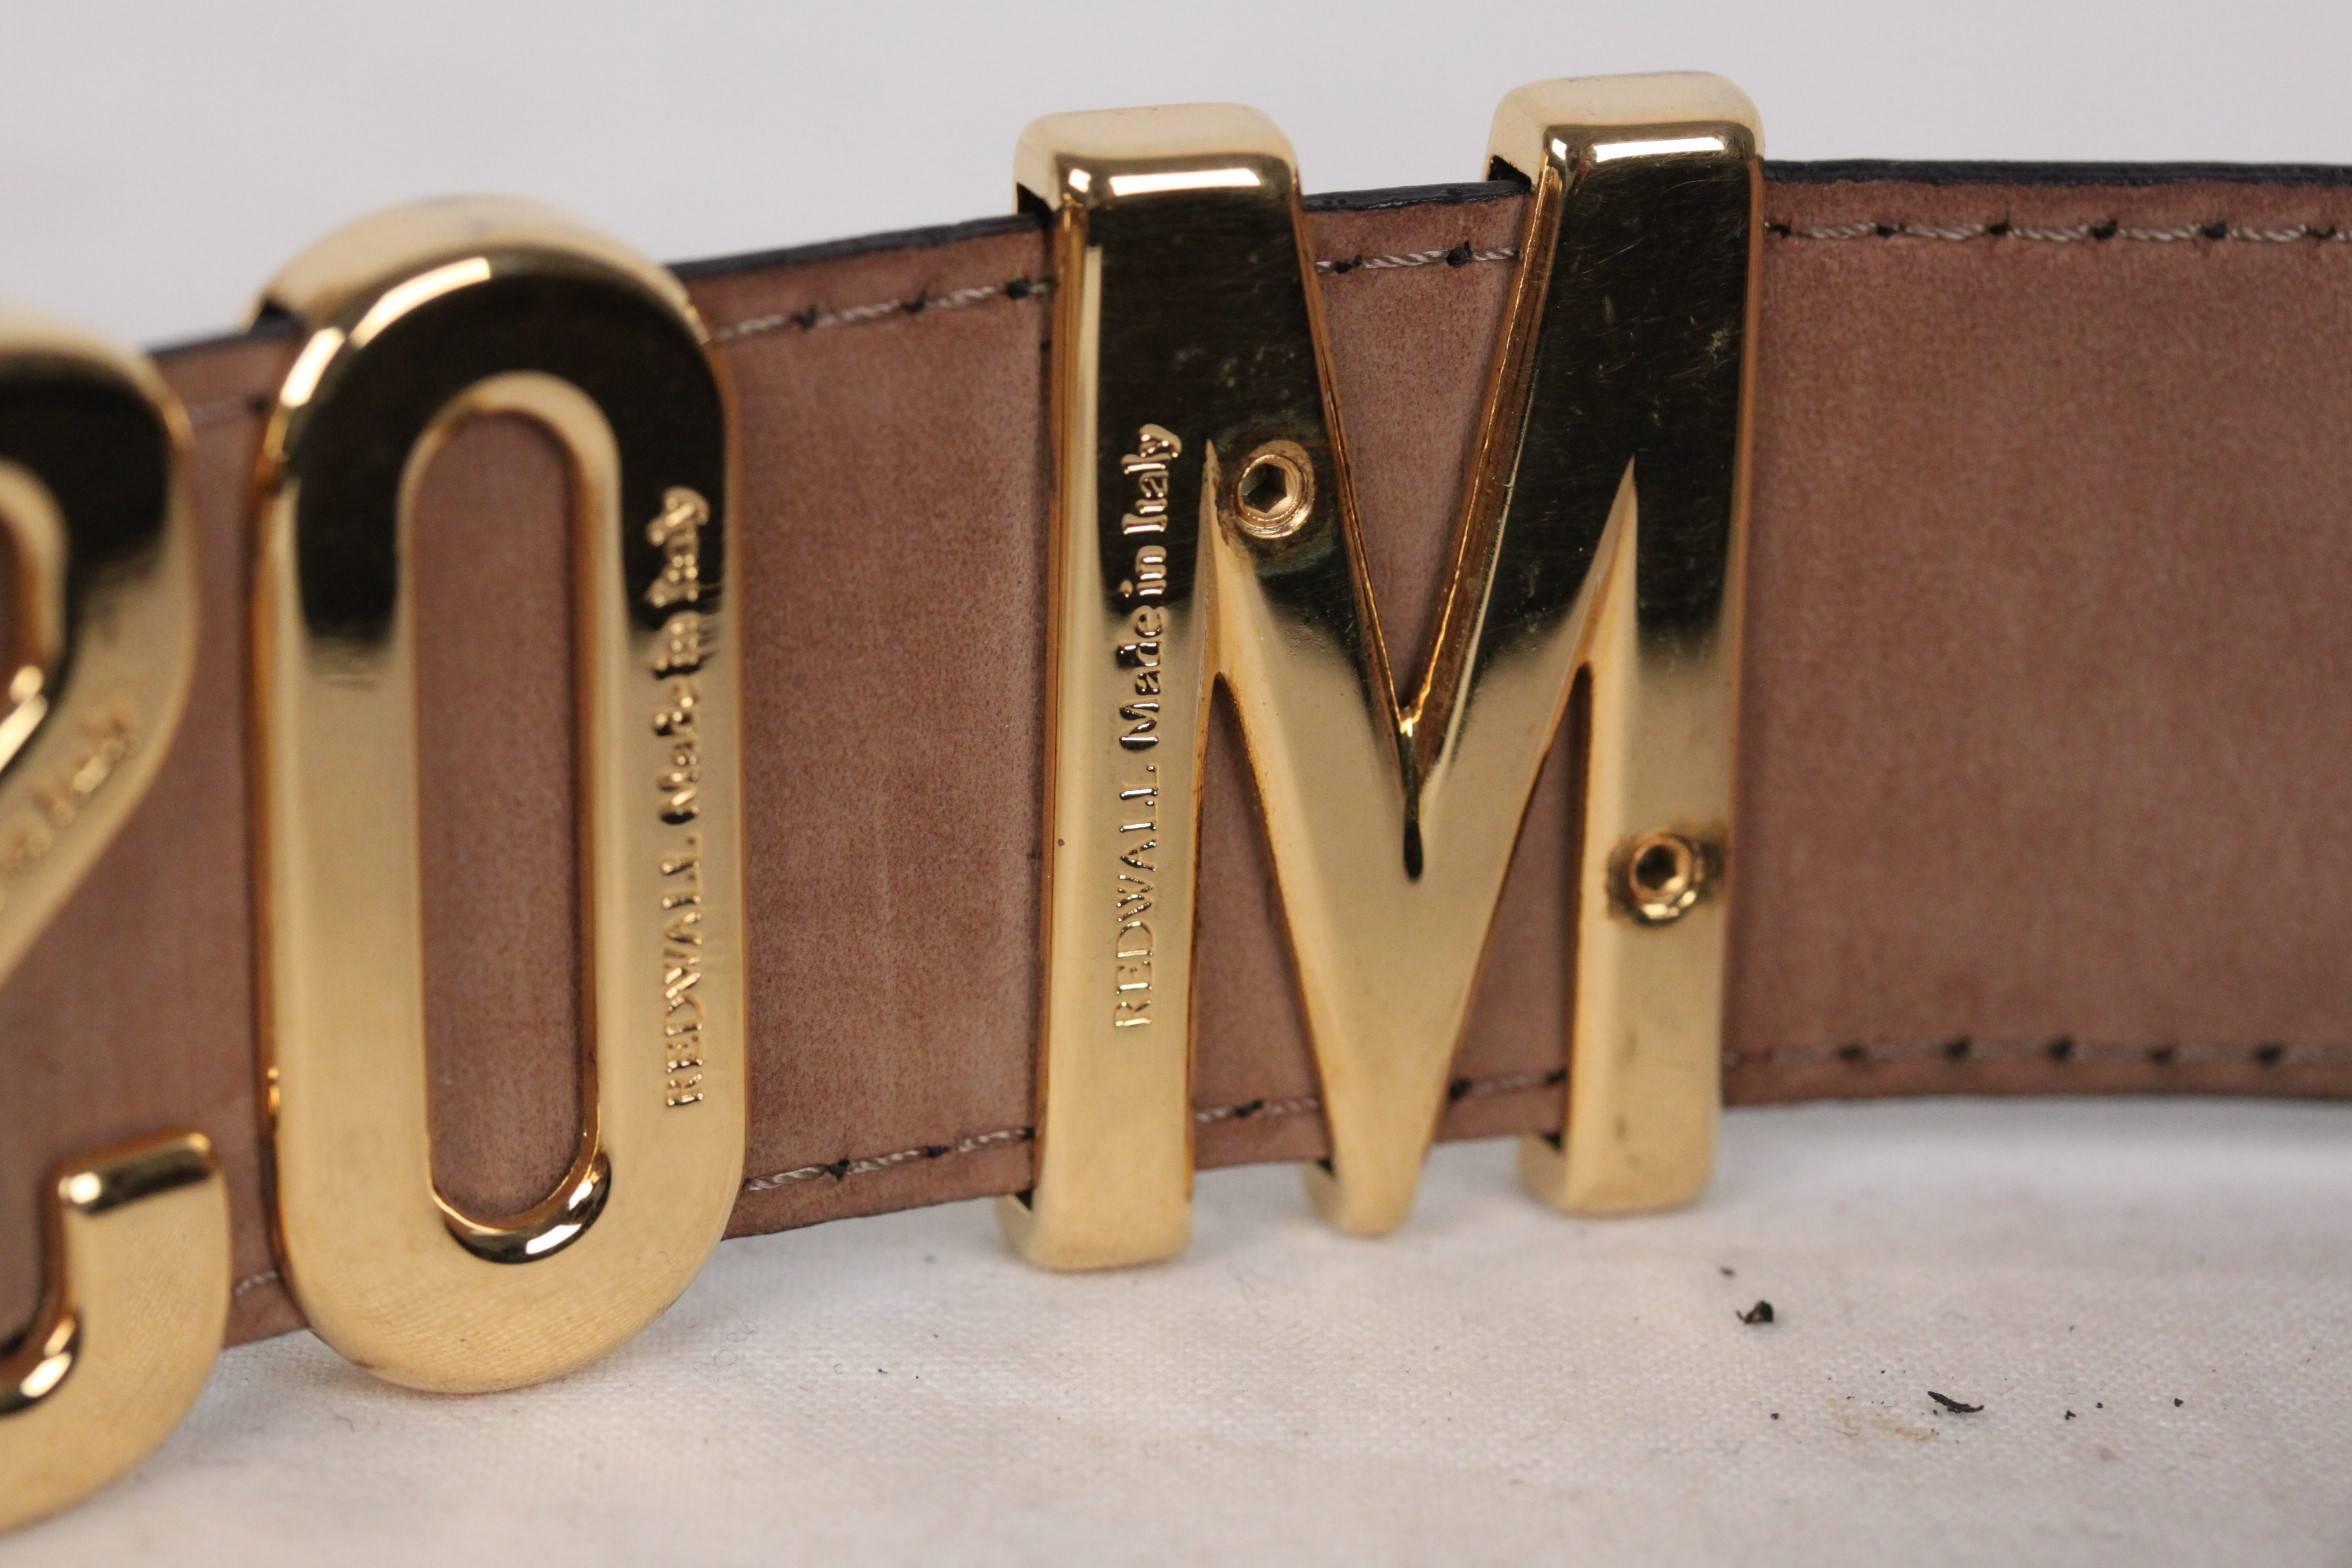 - Stunning vintage lettered belt by Moschino, one of their most famous pieces this is a must have for any true fashionista!
- Black leather belt, tan on the other side
- Gold-tone metal signature letters
- Gold letters apart from The M at the start